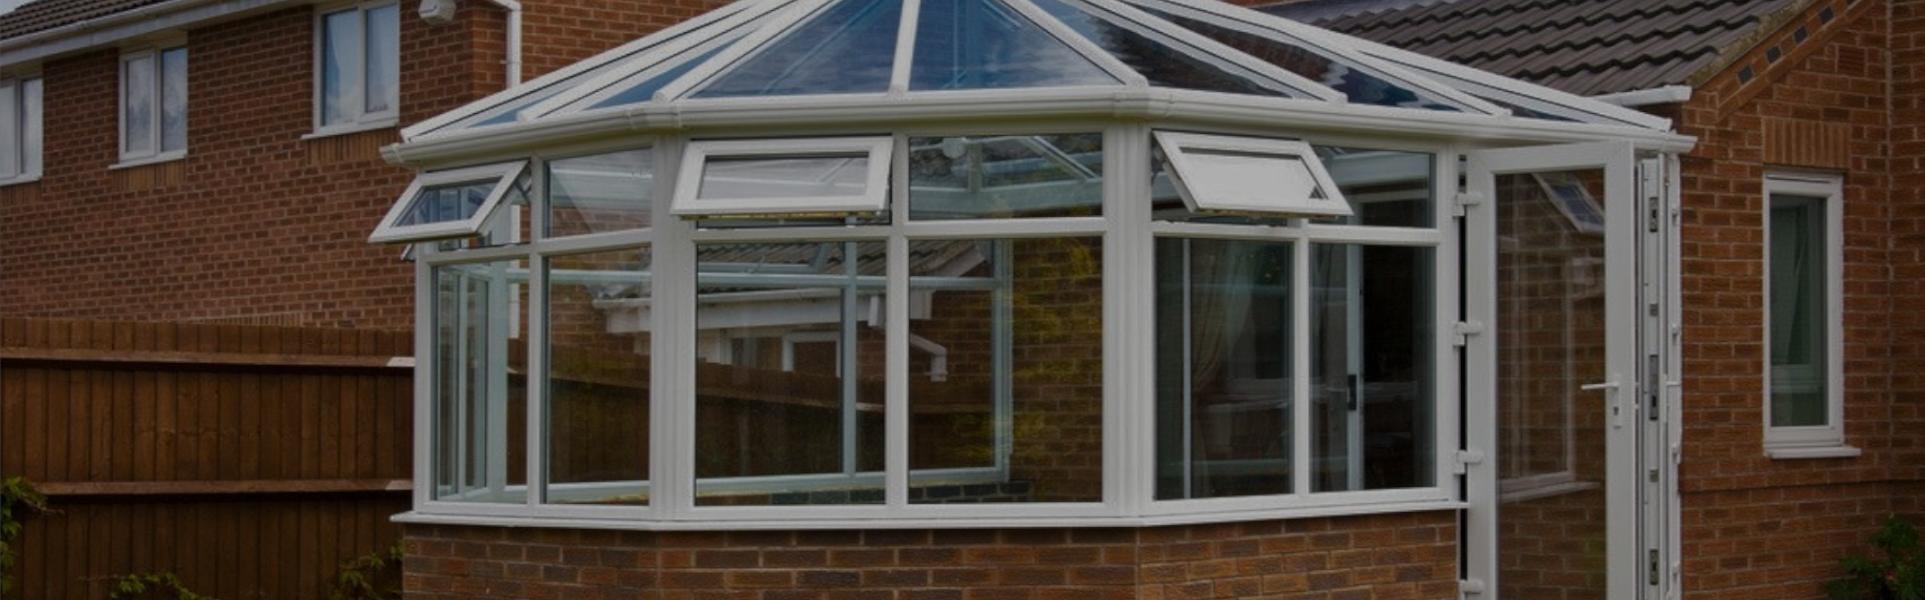 Slider, Glaziers in Staines-upon-Thames, Egham Hythe, TW18